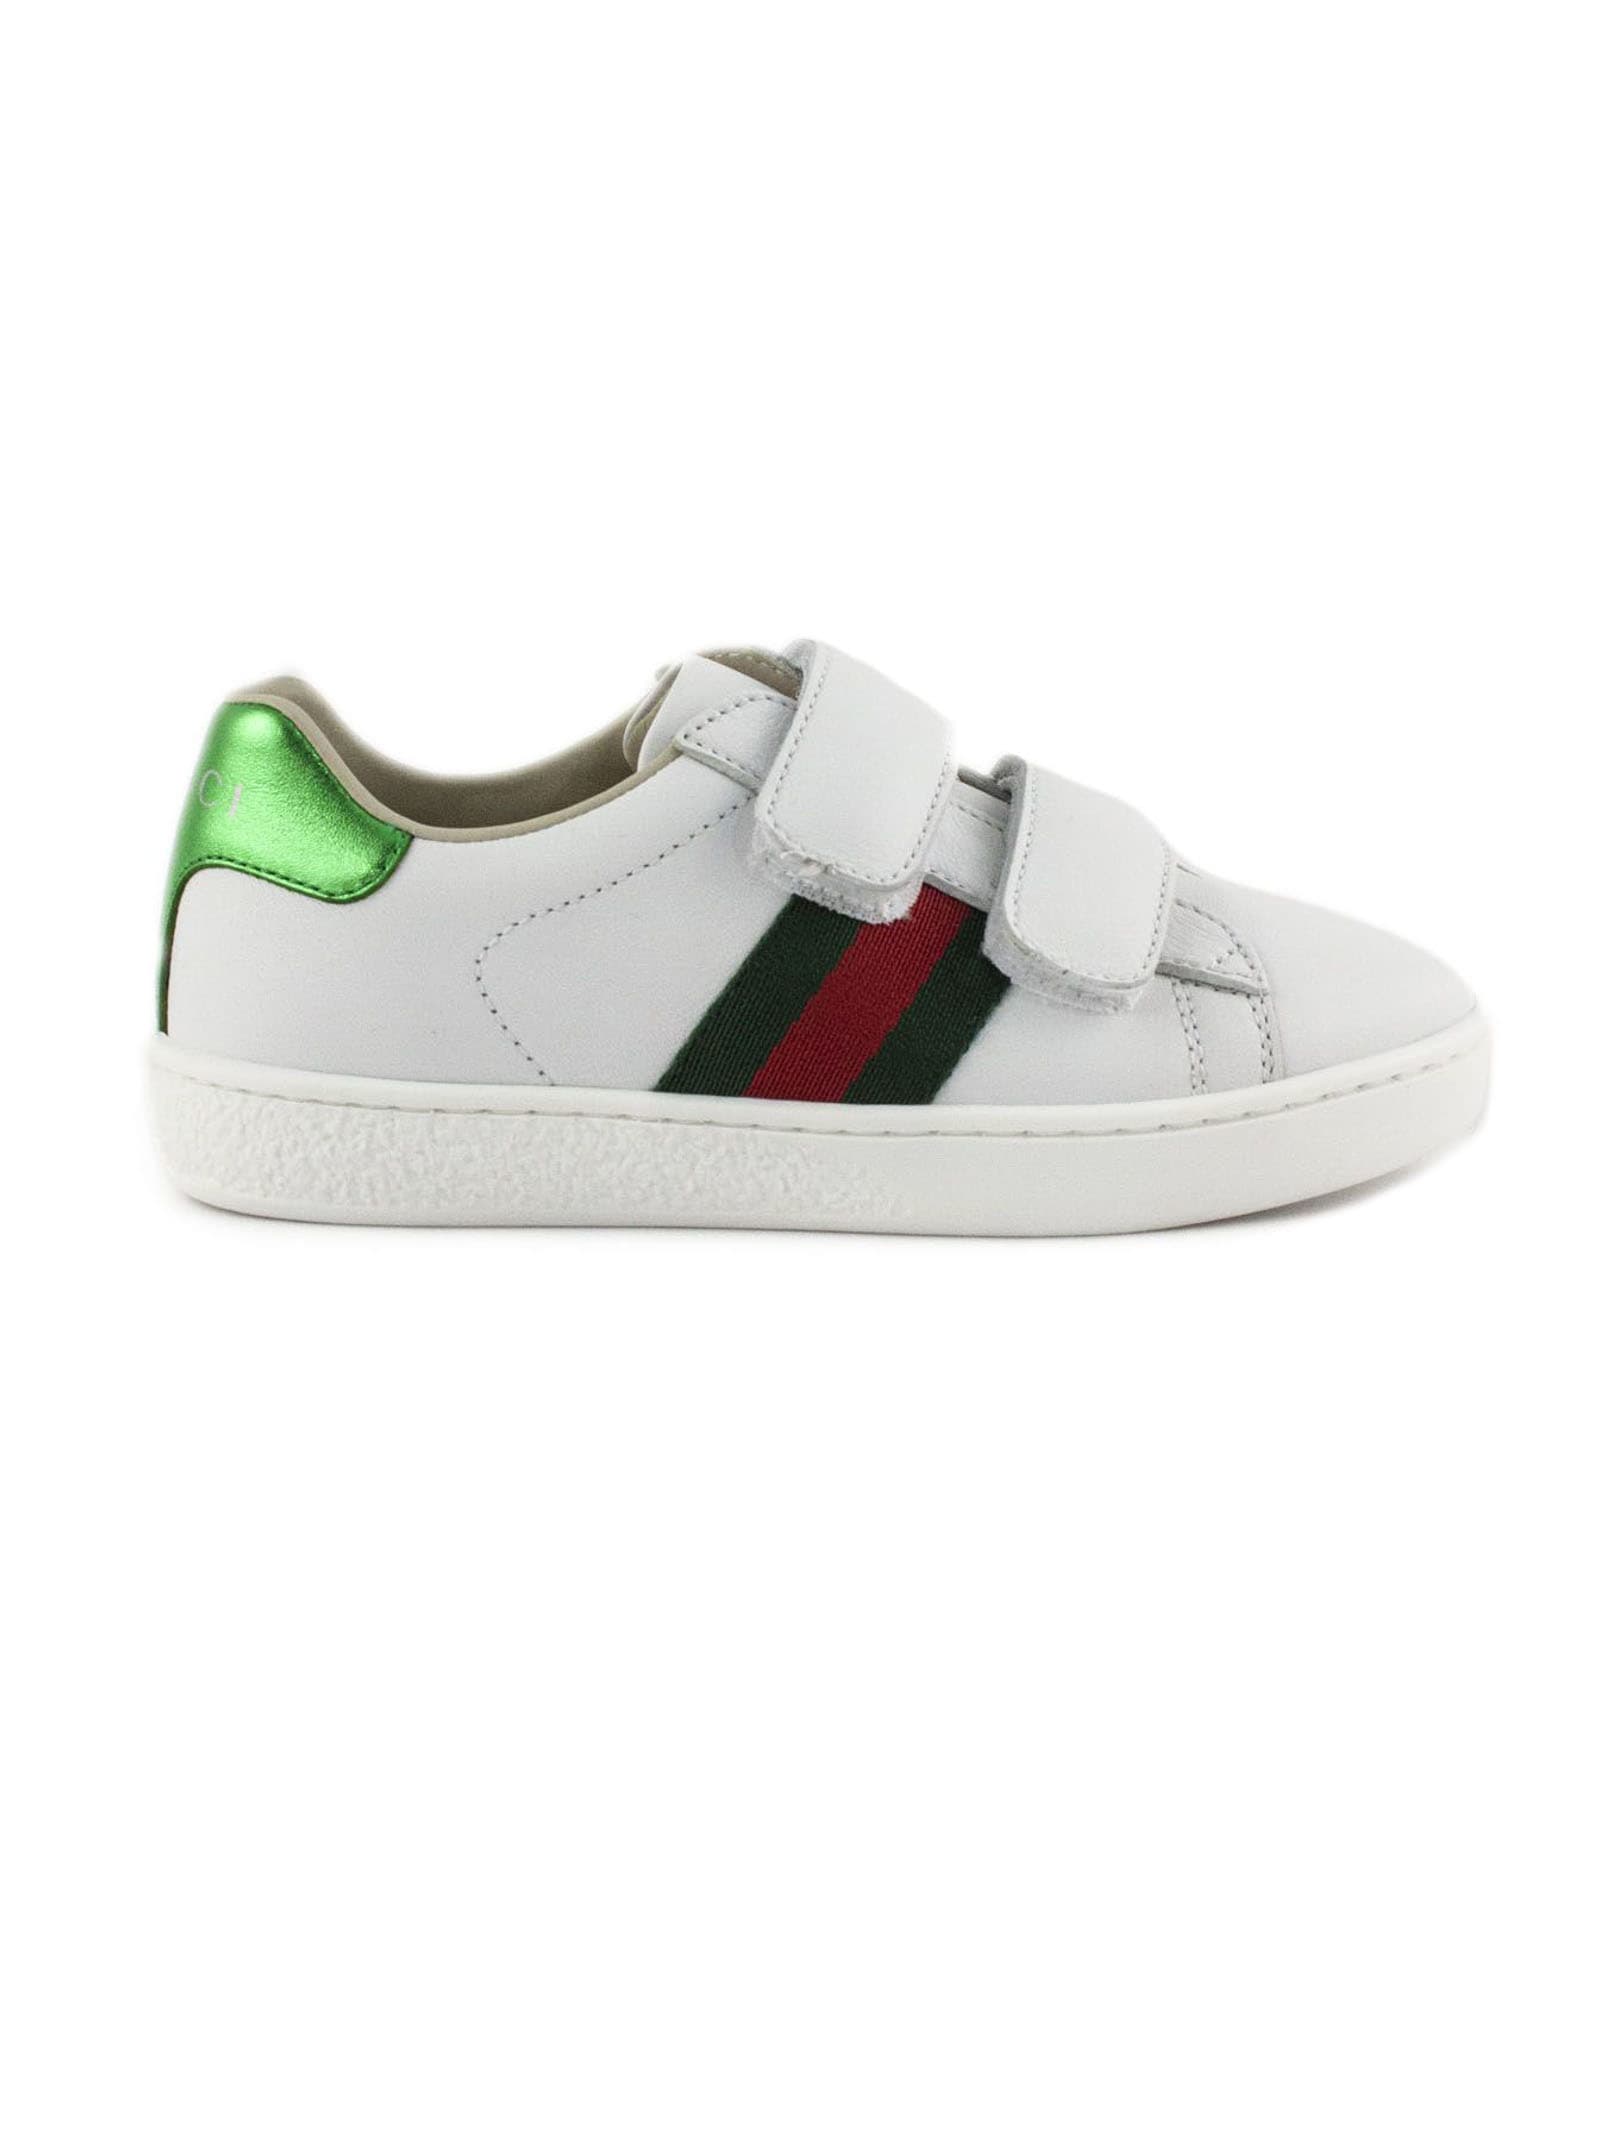 Gucci Ace White Leather Sneaker